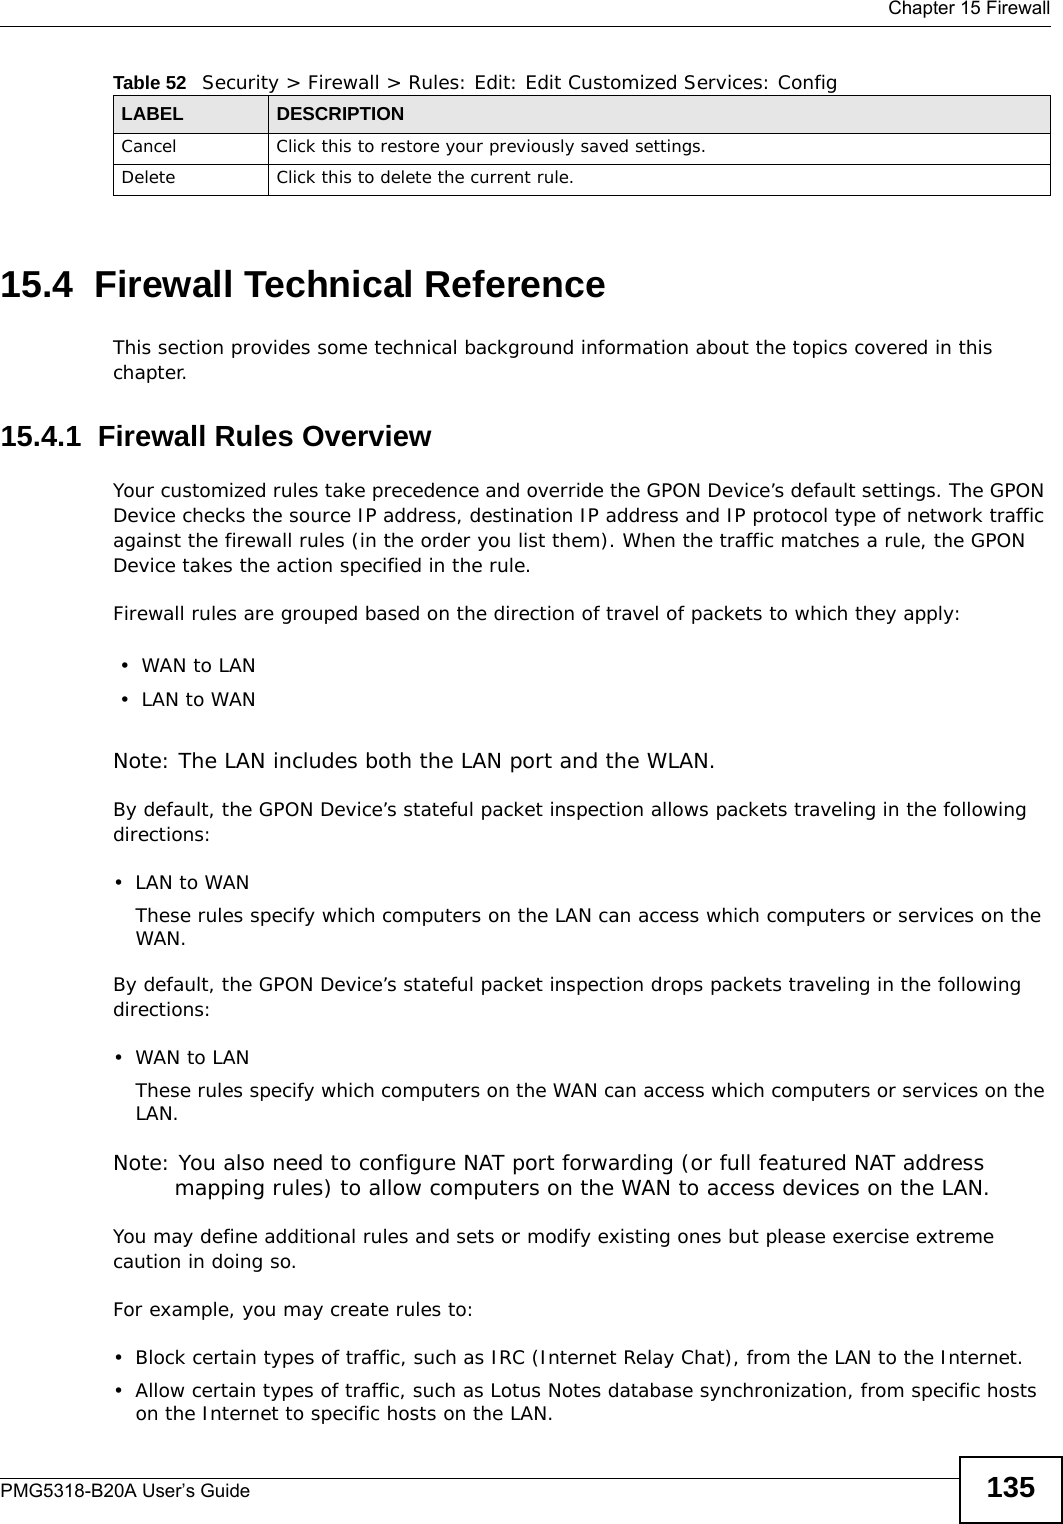  Chapter 15 FirewallPMG5318-B20A User’s Guide 13515.4  Firewall Technical ReferenceThis section provides some technical background information about the topics covered in this chapter.15.4.1  Firewall Rules OverviewYour customized rules take precedence and override the GPON Device’s default settings. The GPON Device checks the source IP address, destination IP address and IP protocol type of network traffic against the firewall rules (in the order you list them). When the traffic matches a rule, the GPON Device takes the action specified in the rule. Firewall rules are grouped based on the direction of travel of packets to which they apply: Note: The LAN includes both the LAN port and the WLAN.By default, the GPON Device’s stateful packet inspection allows packets traveling in the following directions:•LAN to WANThese rules specify which computers on the LAN can access which computers or services on the WAN.By default, the GPON Device’s stateful packet inspection drops packets traveling in the following directions:•WAN to LANThese rules specify which computers on the WAN can access which computers or services on the LAN. Note: You also need to configure NAT port forwarding (or full featured NAT address mapping rules) to allow computers on the WAN to access devices on the LAN.You may define additional rules and sets or modify existing ones but please exercise extreme caution in doing so.For example, you may create rules to:• Block certain types of traffic, such as IRC (Internet Relay Chat), from the LAN to the Internet.• Allow certain types of traffic, such as Lotus Notes database synchronization, from specific hosts on the Internet to specific hosts on the LAN.Cancel Click this to restore your previously saved settings.Delete Click this to delete the current rule.Table 52   Security &gt; Firewall &gt; Rules: Edit: Edit Customized Services: ConfigLABEL DESCRIPTION•WAN to LAN•LAN to WAN